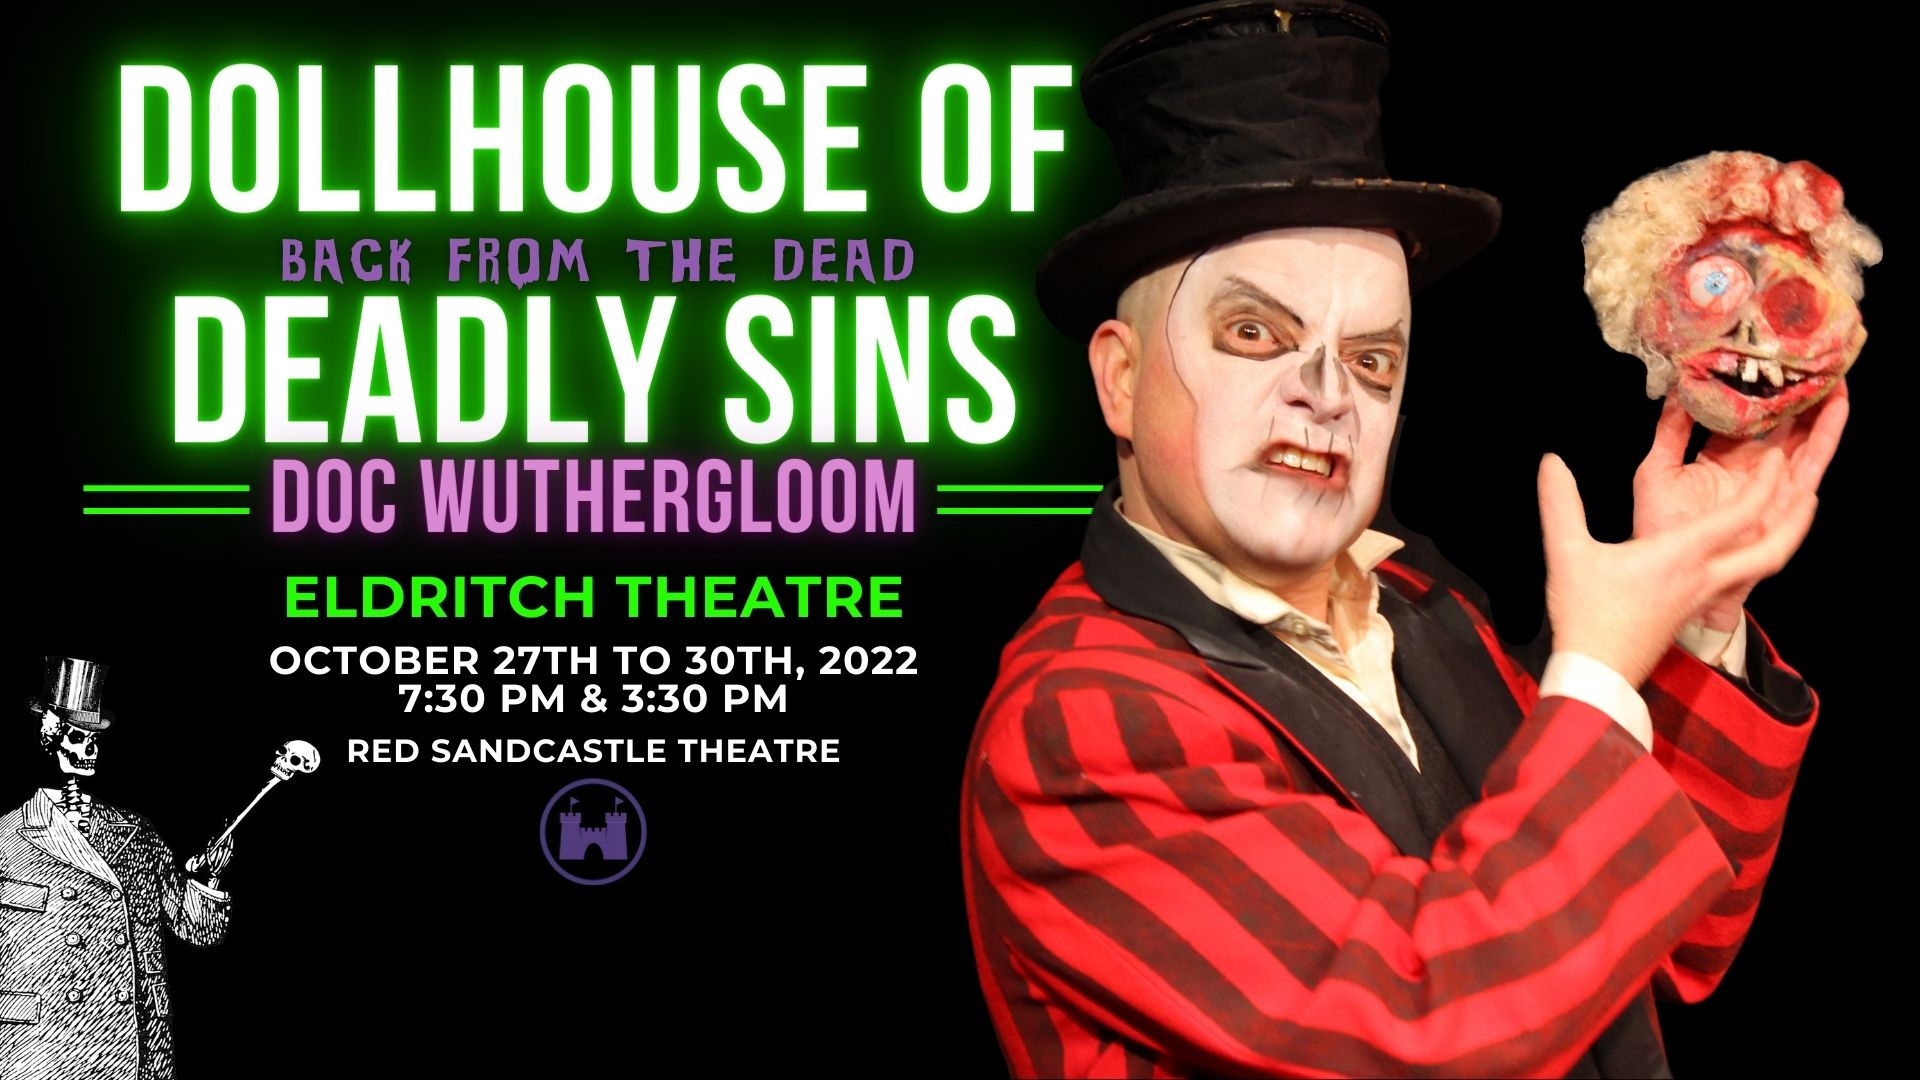 Doc Wuthergloom’s Dollhouse of Deadly Sins